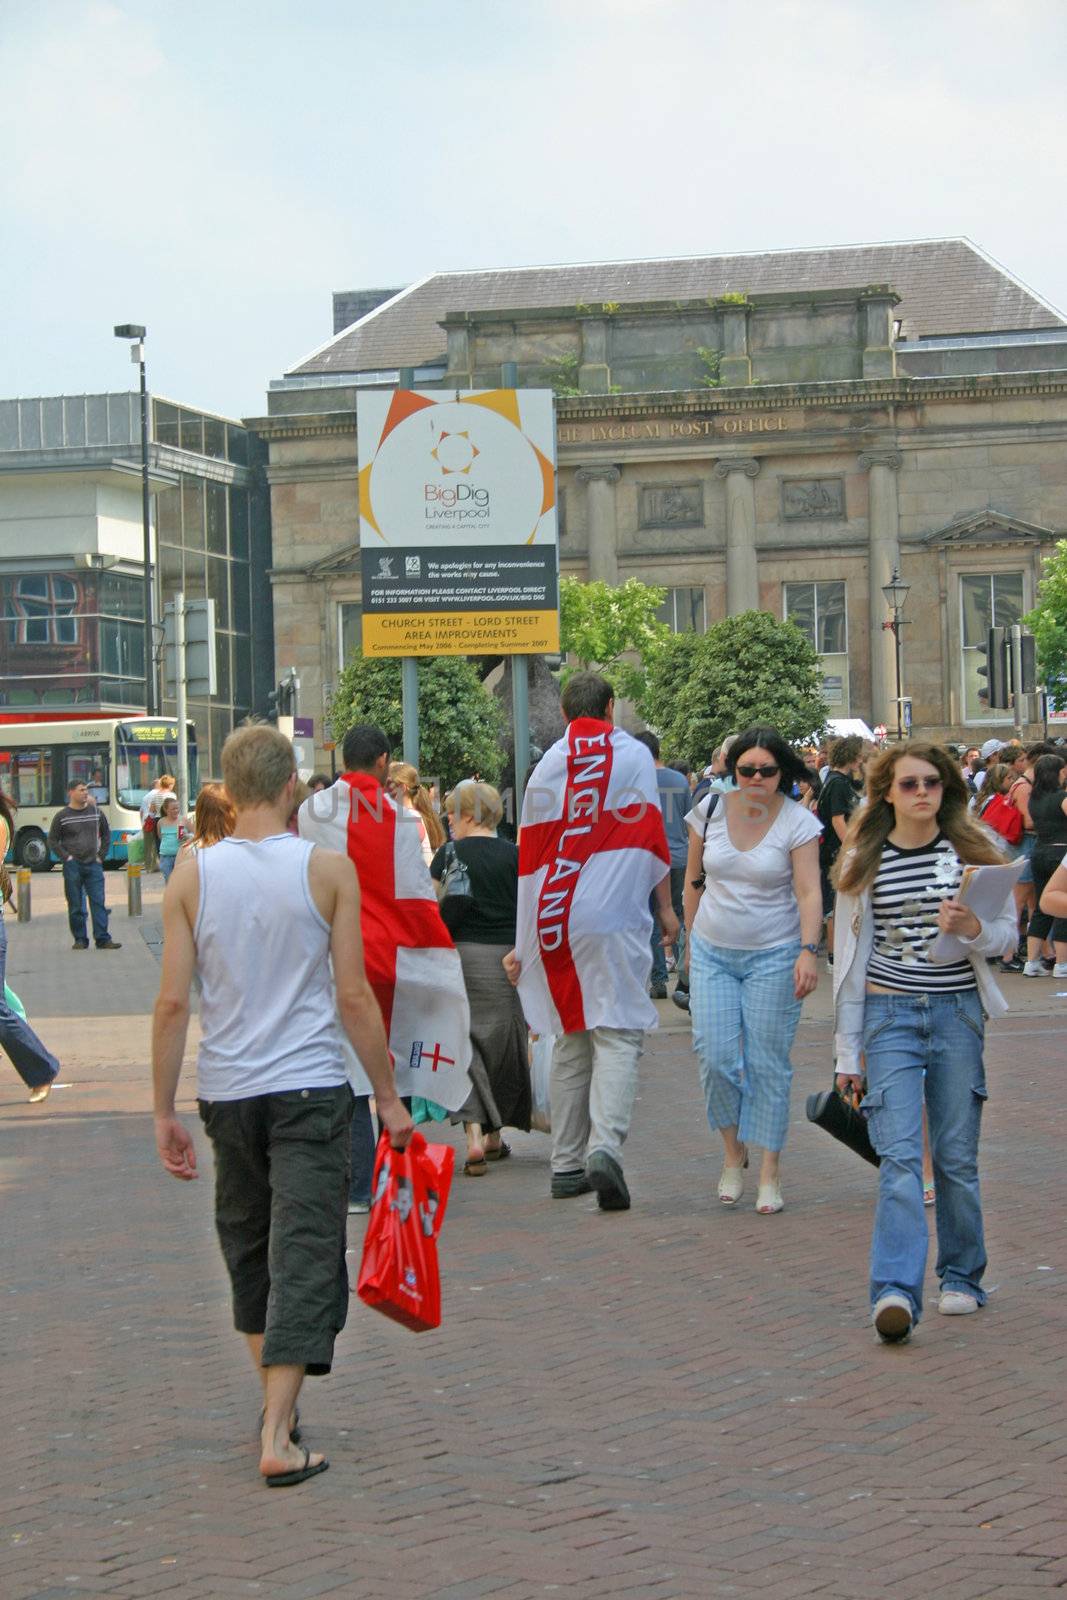 England Football Supporters in Liverpool UK by green308